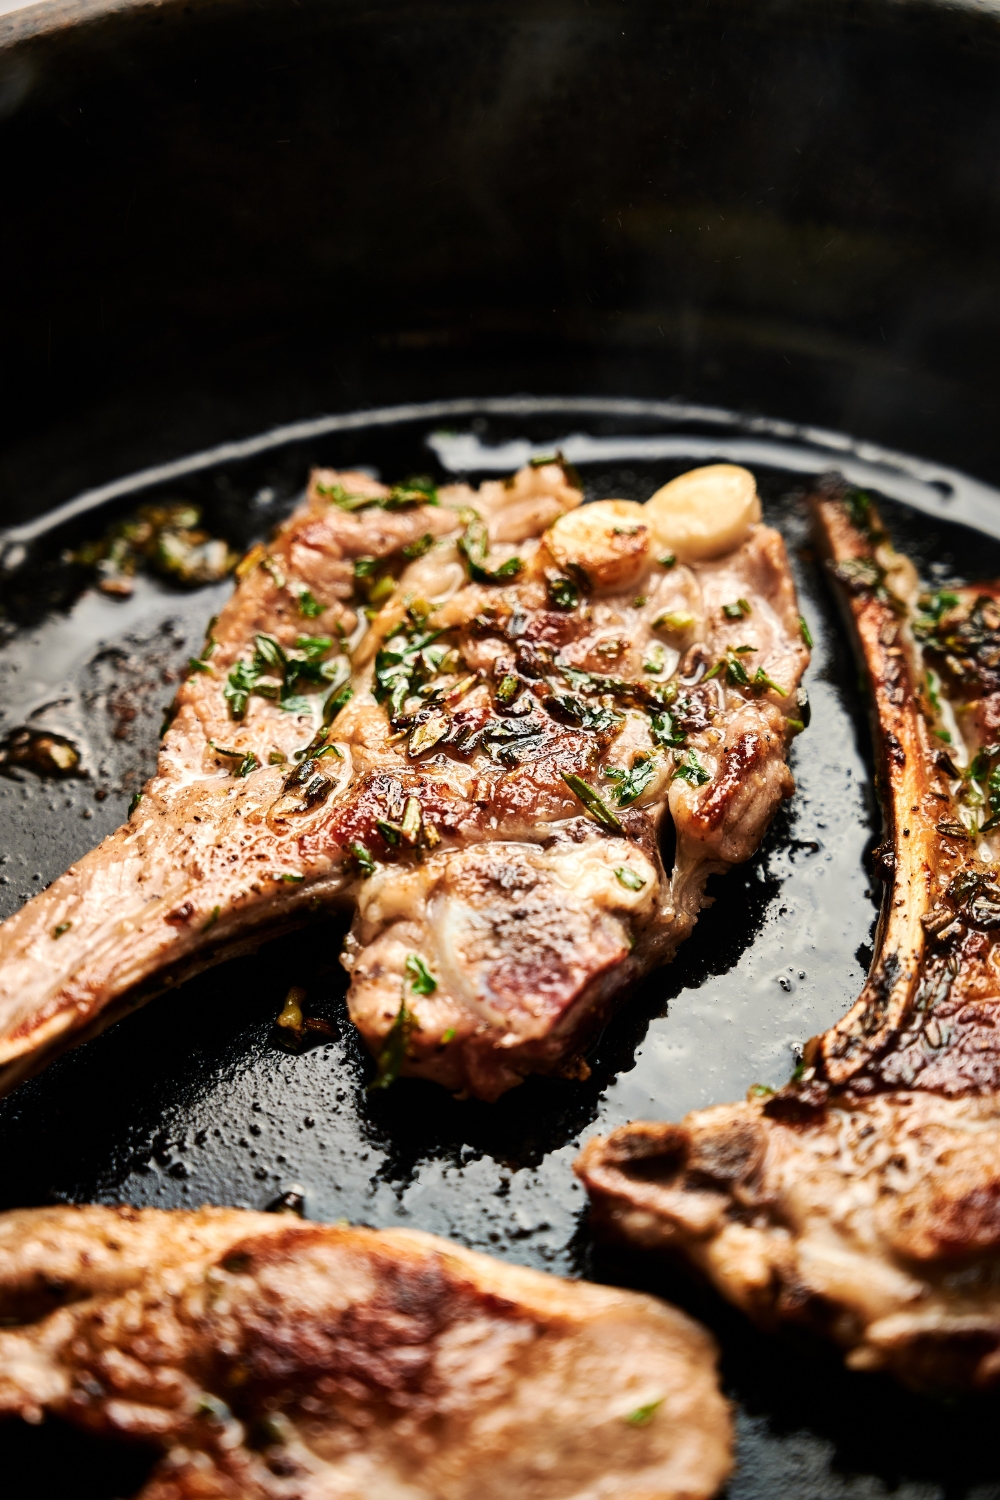 Lamb lollipops are searing in oil in a black cast iron pan.